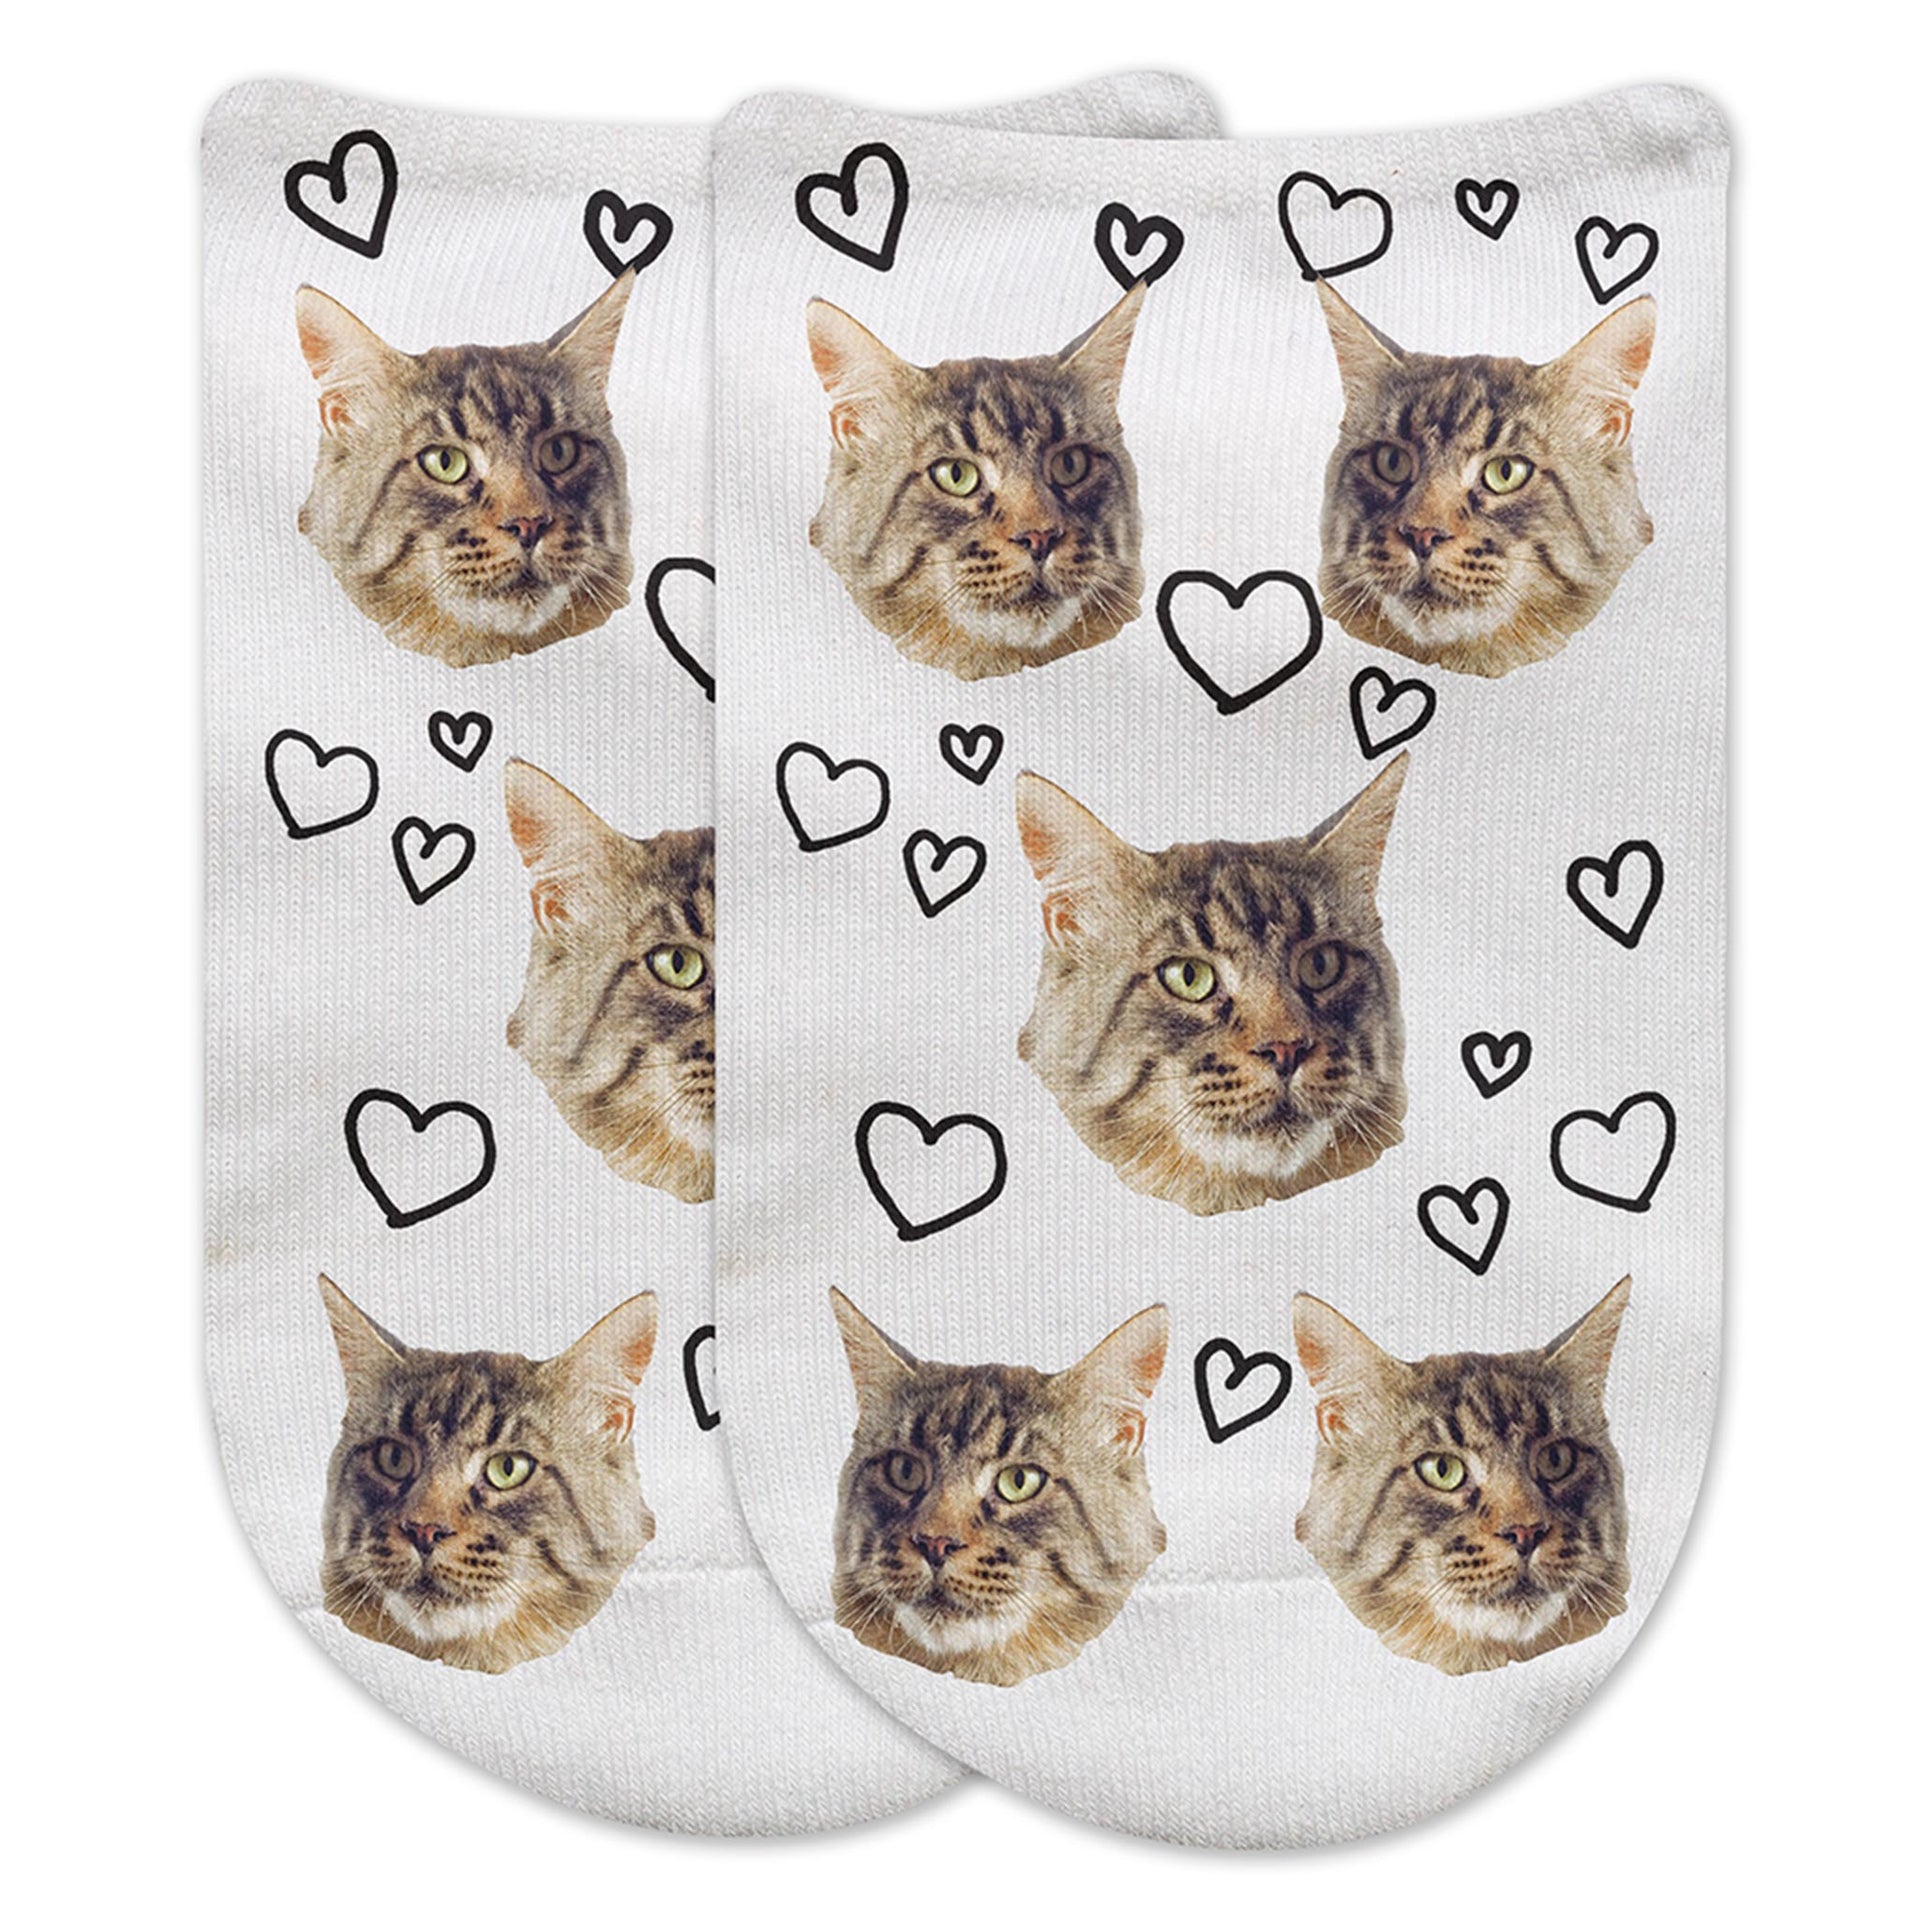 Super cute cat and dog faces custom printed with hearts design all over the top of white cotton no show footie socks.